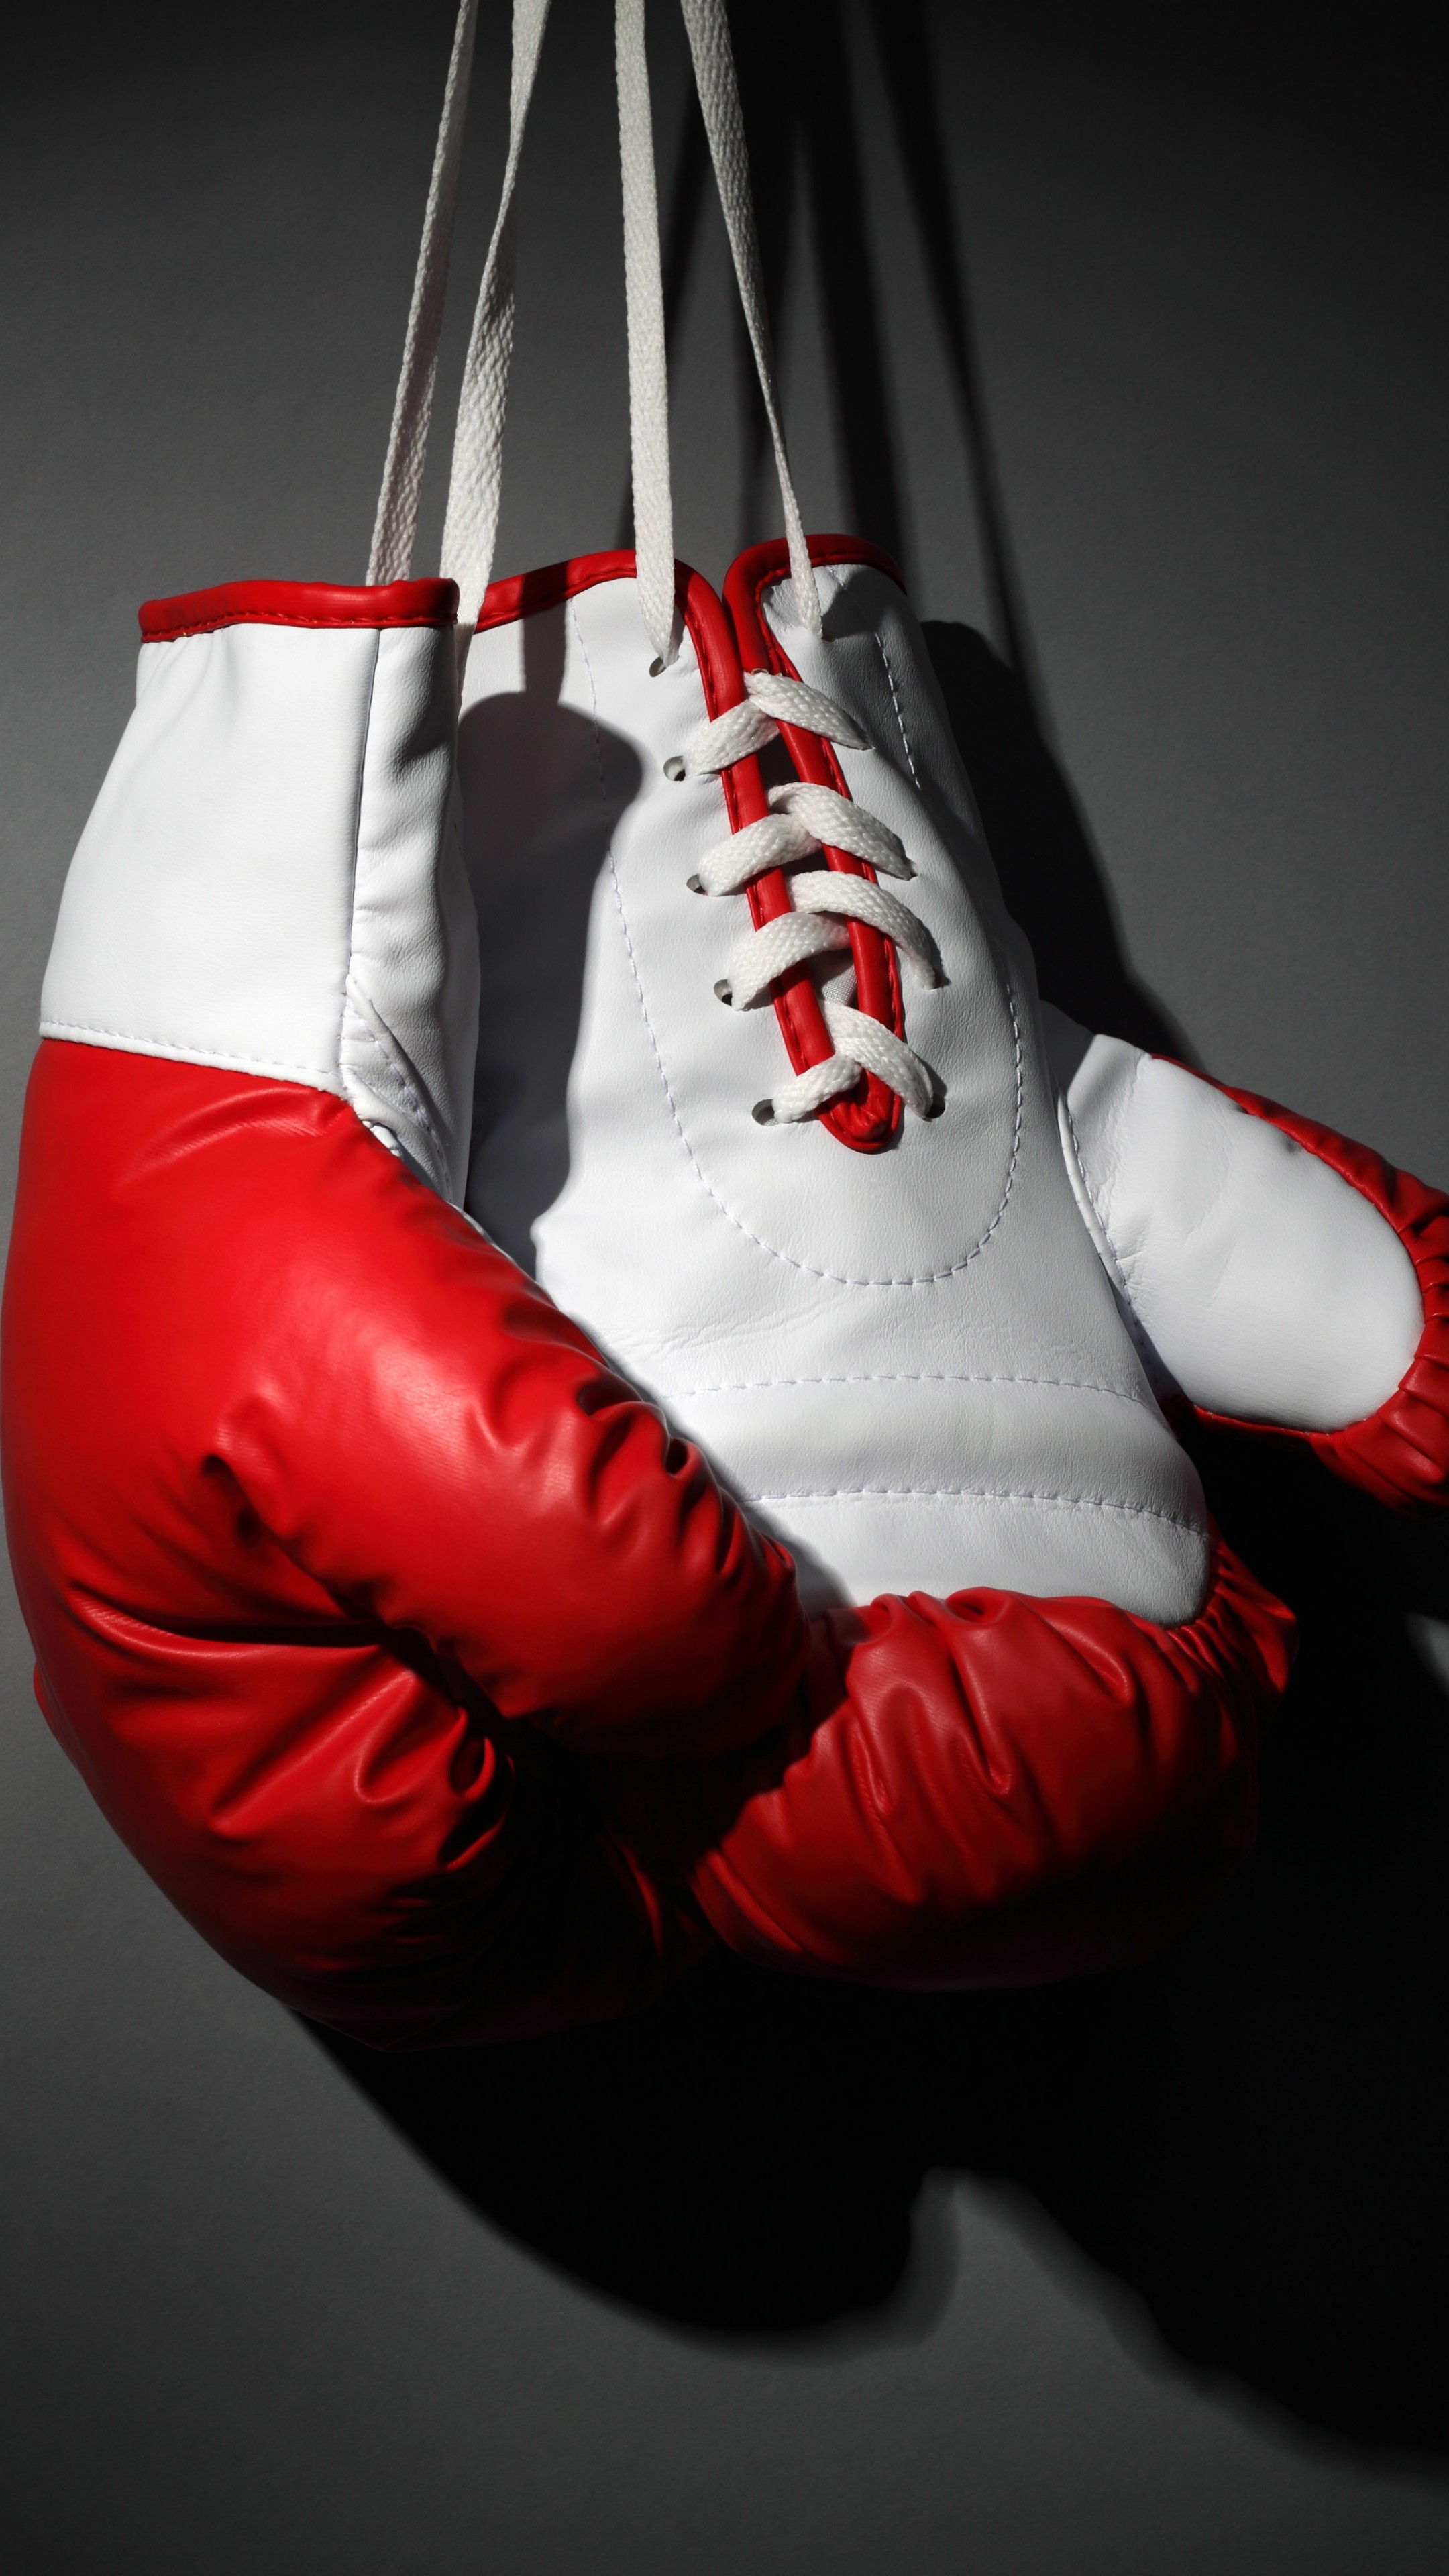 Combat Sports: Leather Boxing Gloves, British Boxing Board of Control, Sports Equipment. 2160x3840 4K Background.